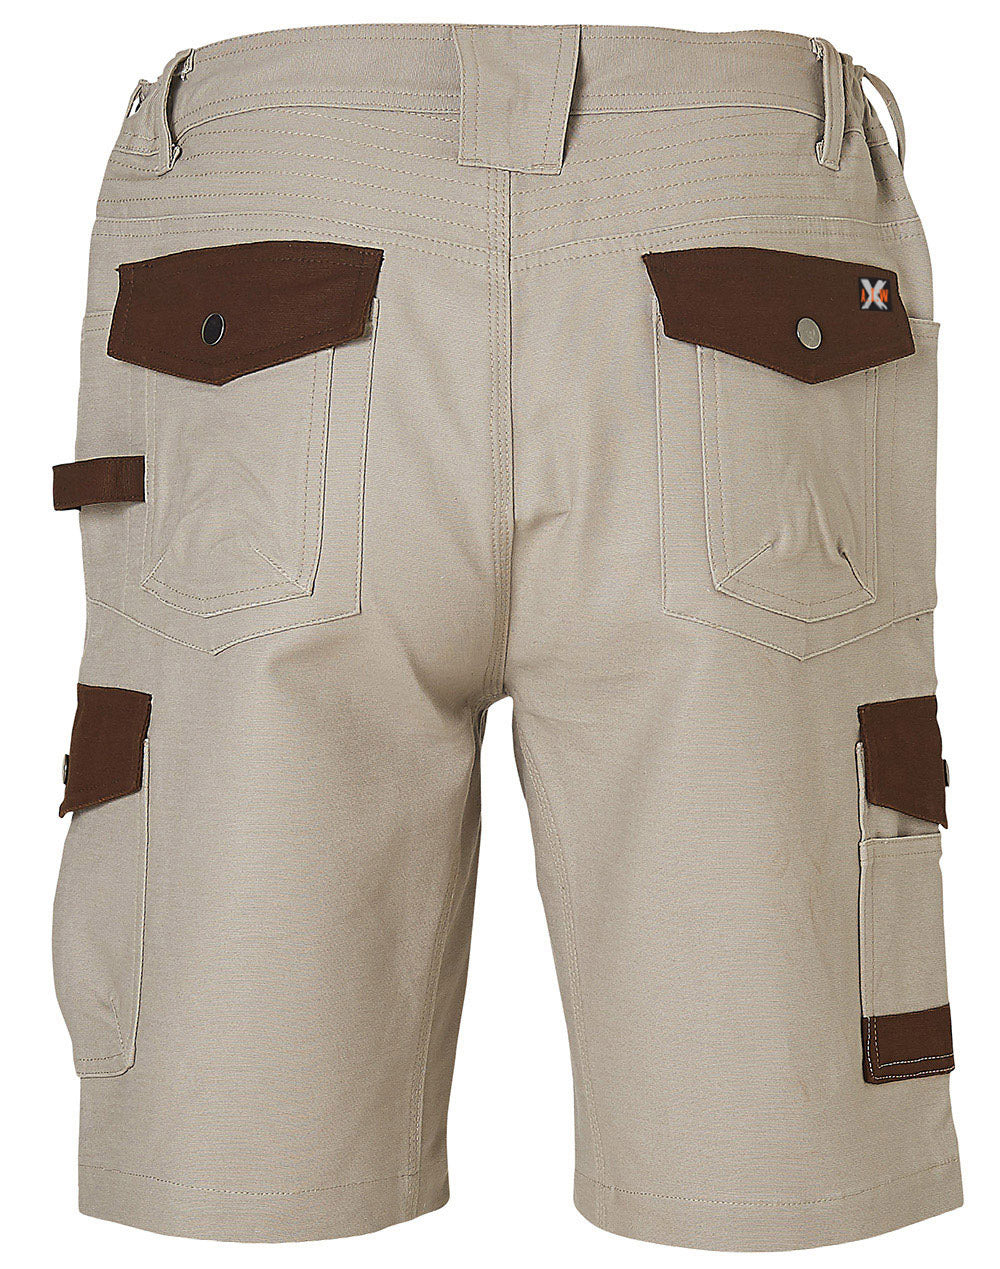 AIW - WP23 - MENS STRETCH CARGO WORK SHORTS WITH DESIGN PANEL TREATMENTS